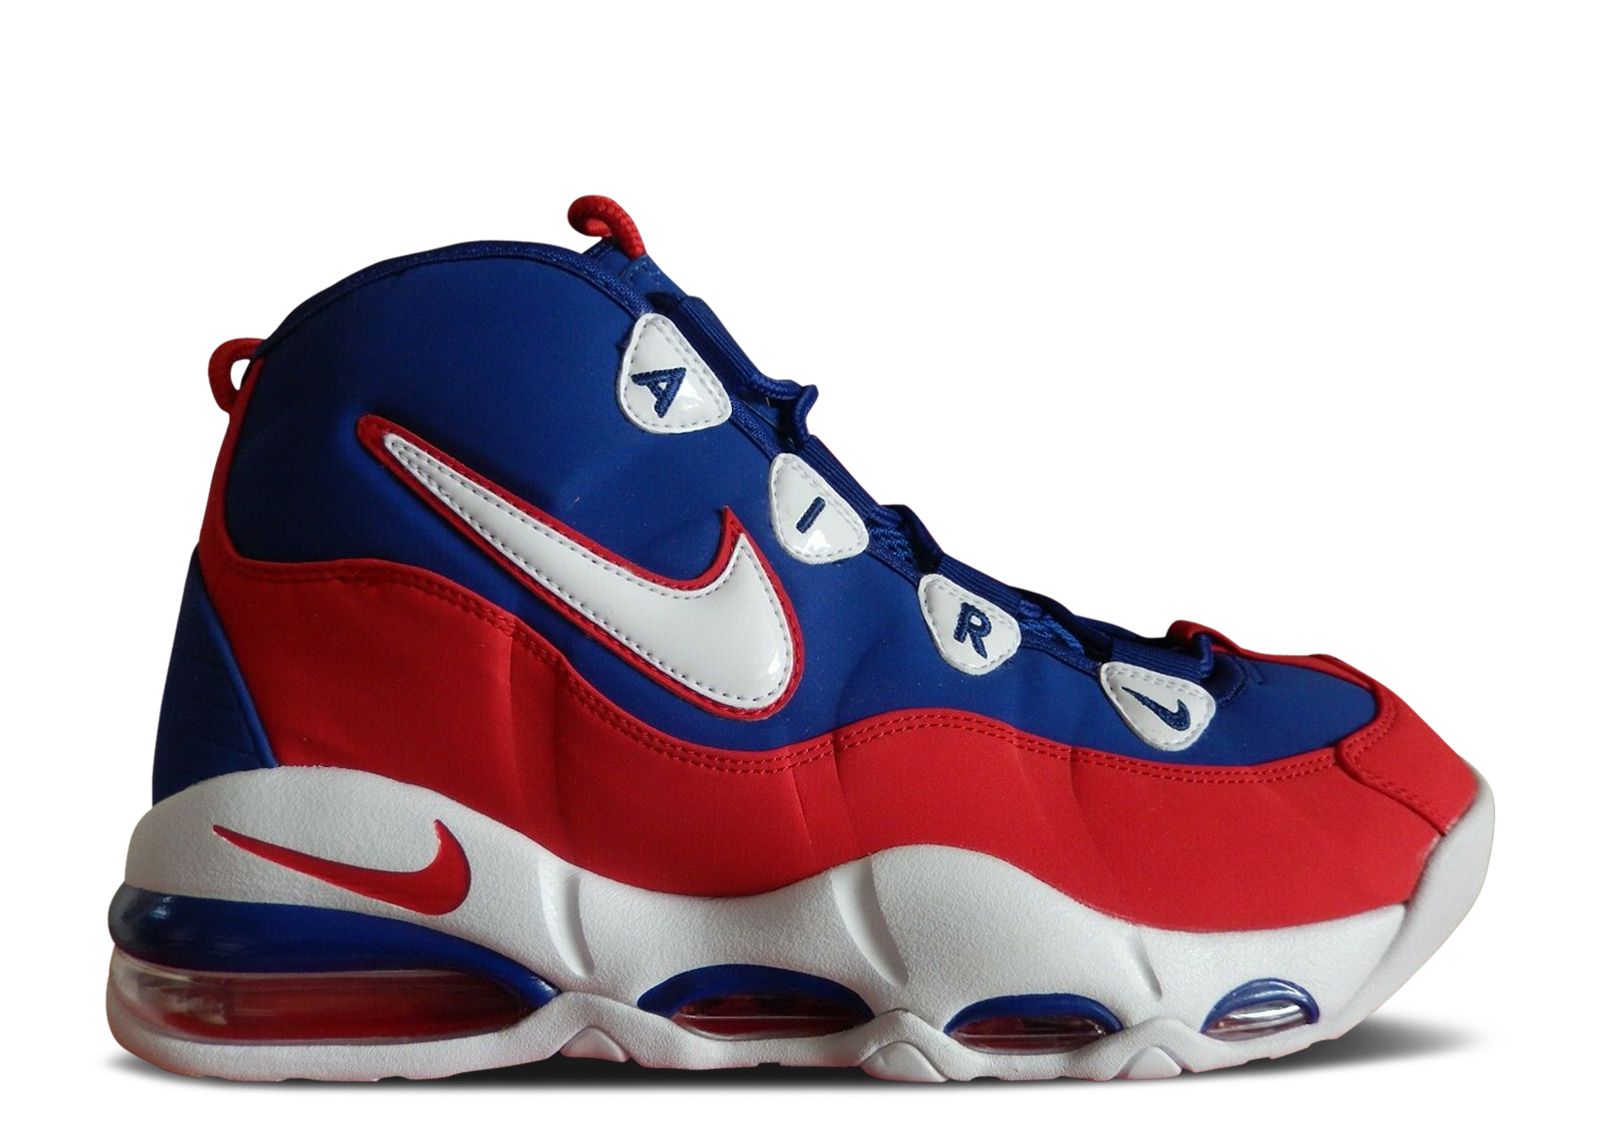 Flashback to '95: The Nike Air Max Uptempo 